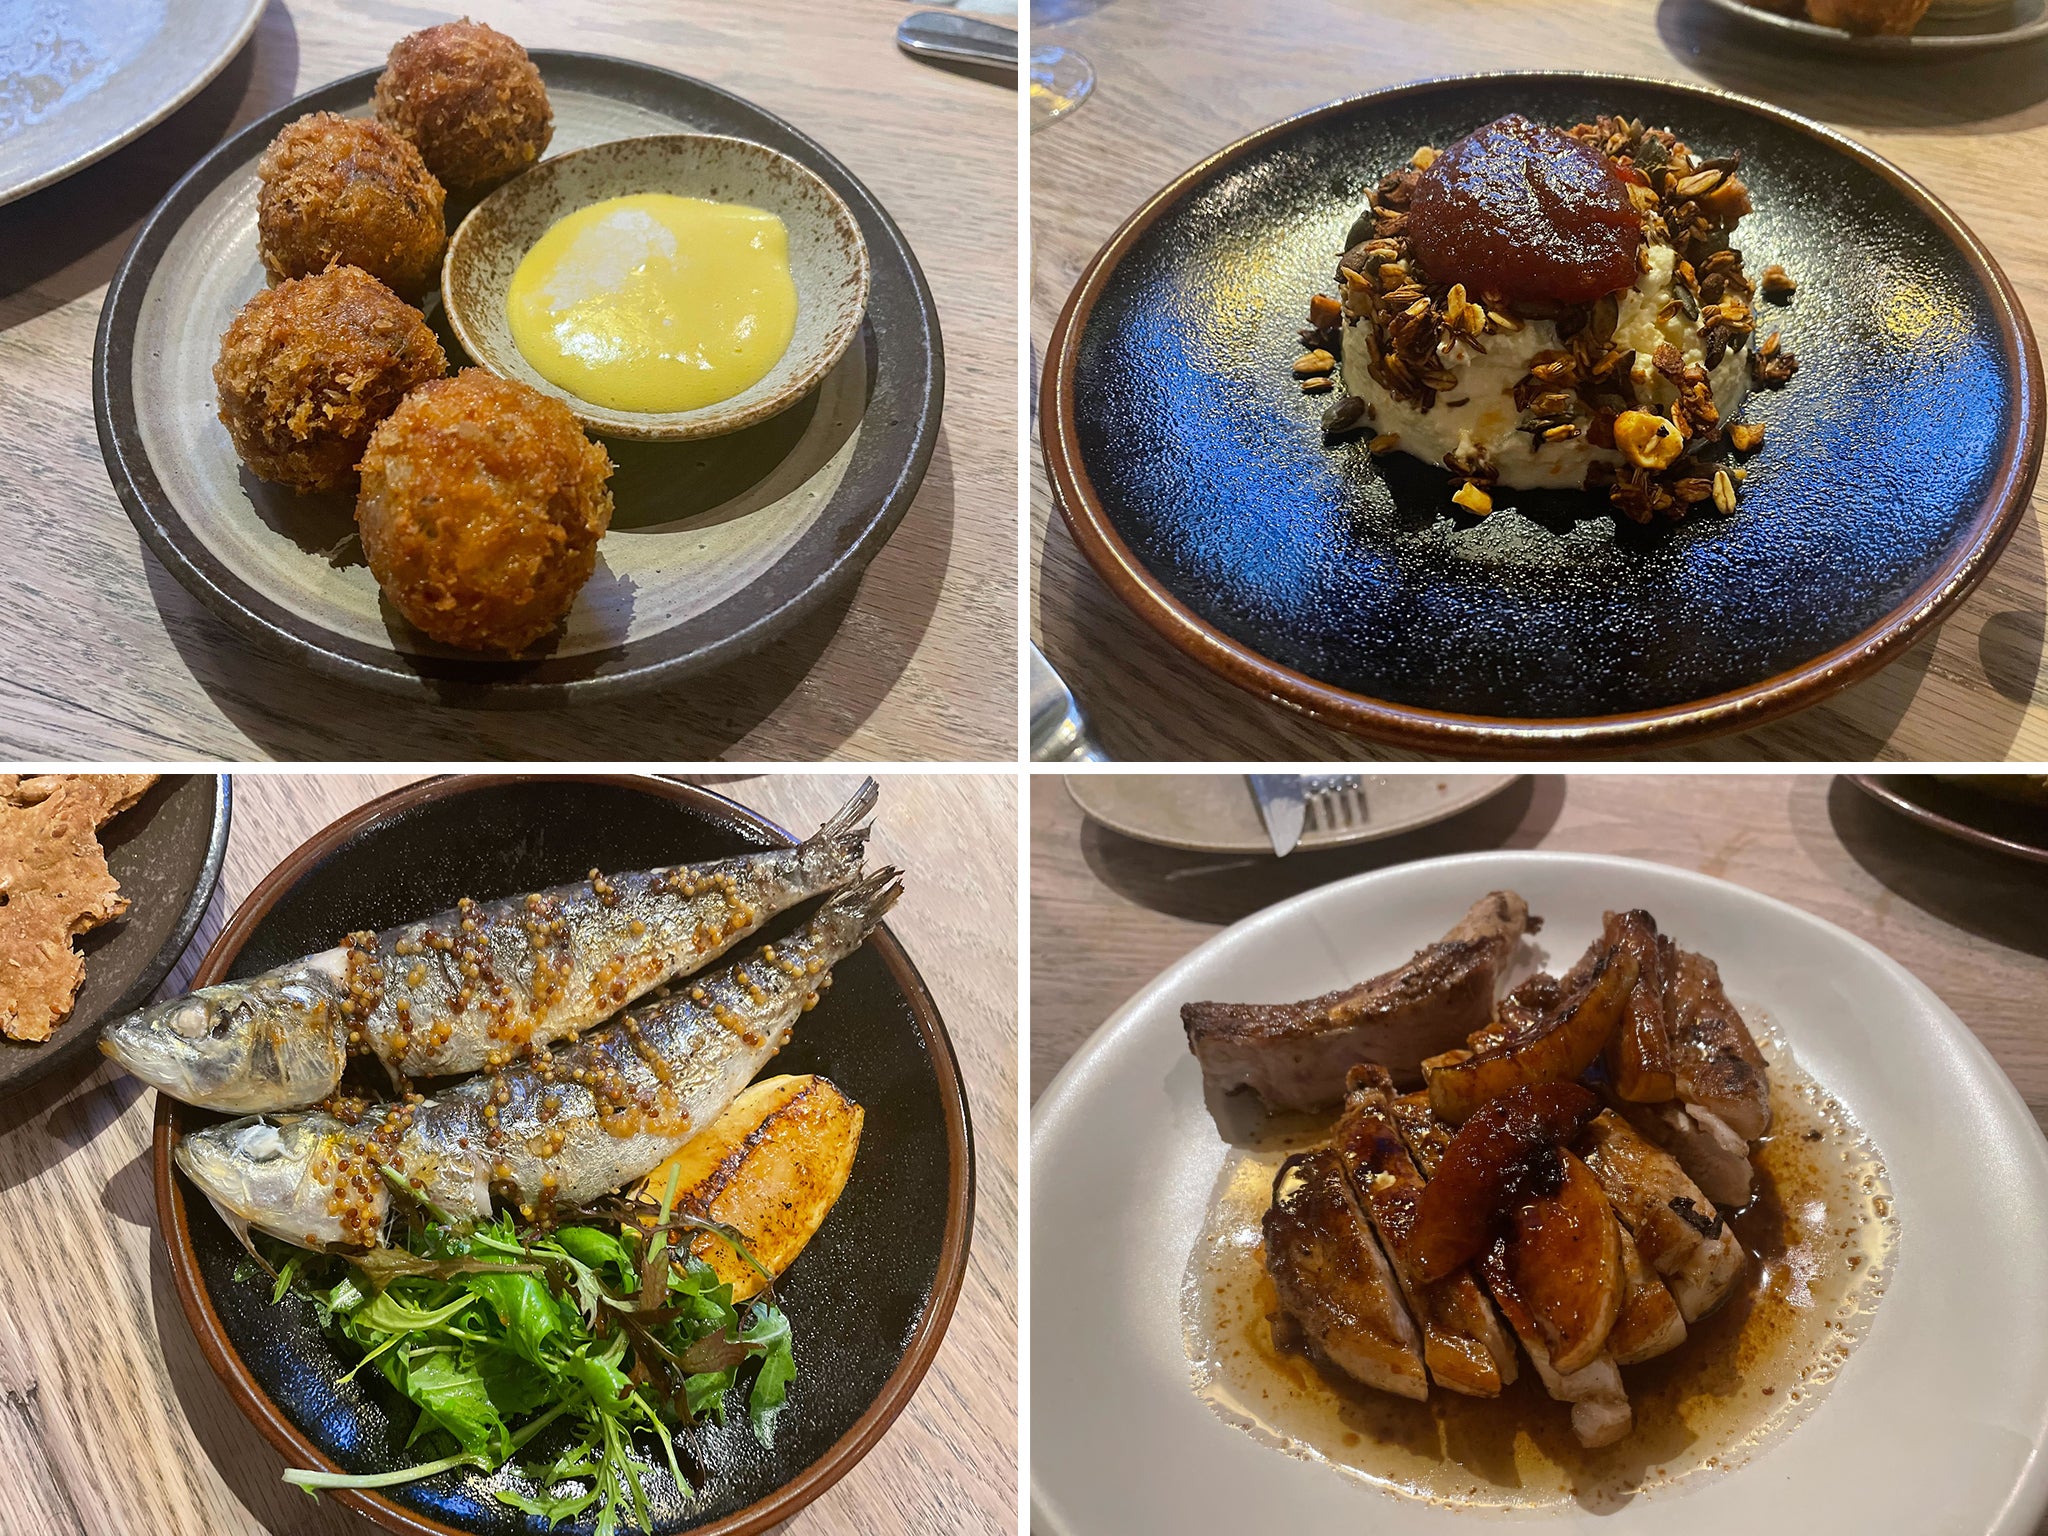 Clockwise from top right: ham knuckle croquettes, sweet and savoury granola, fried sardines in burnt lemon, and a pork chop with charred fruit